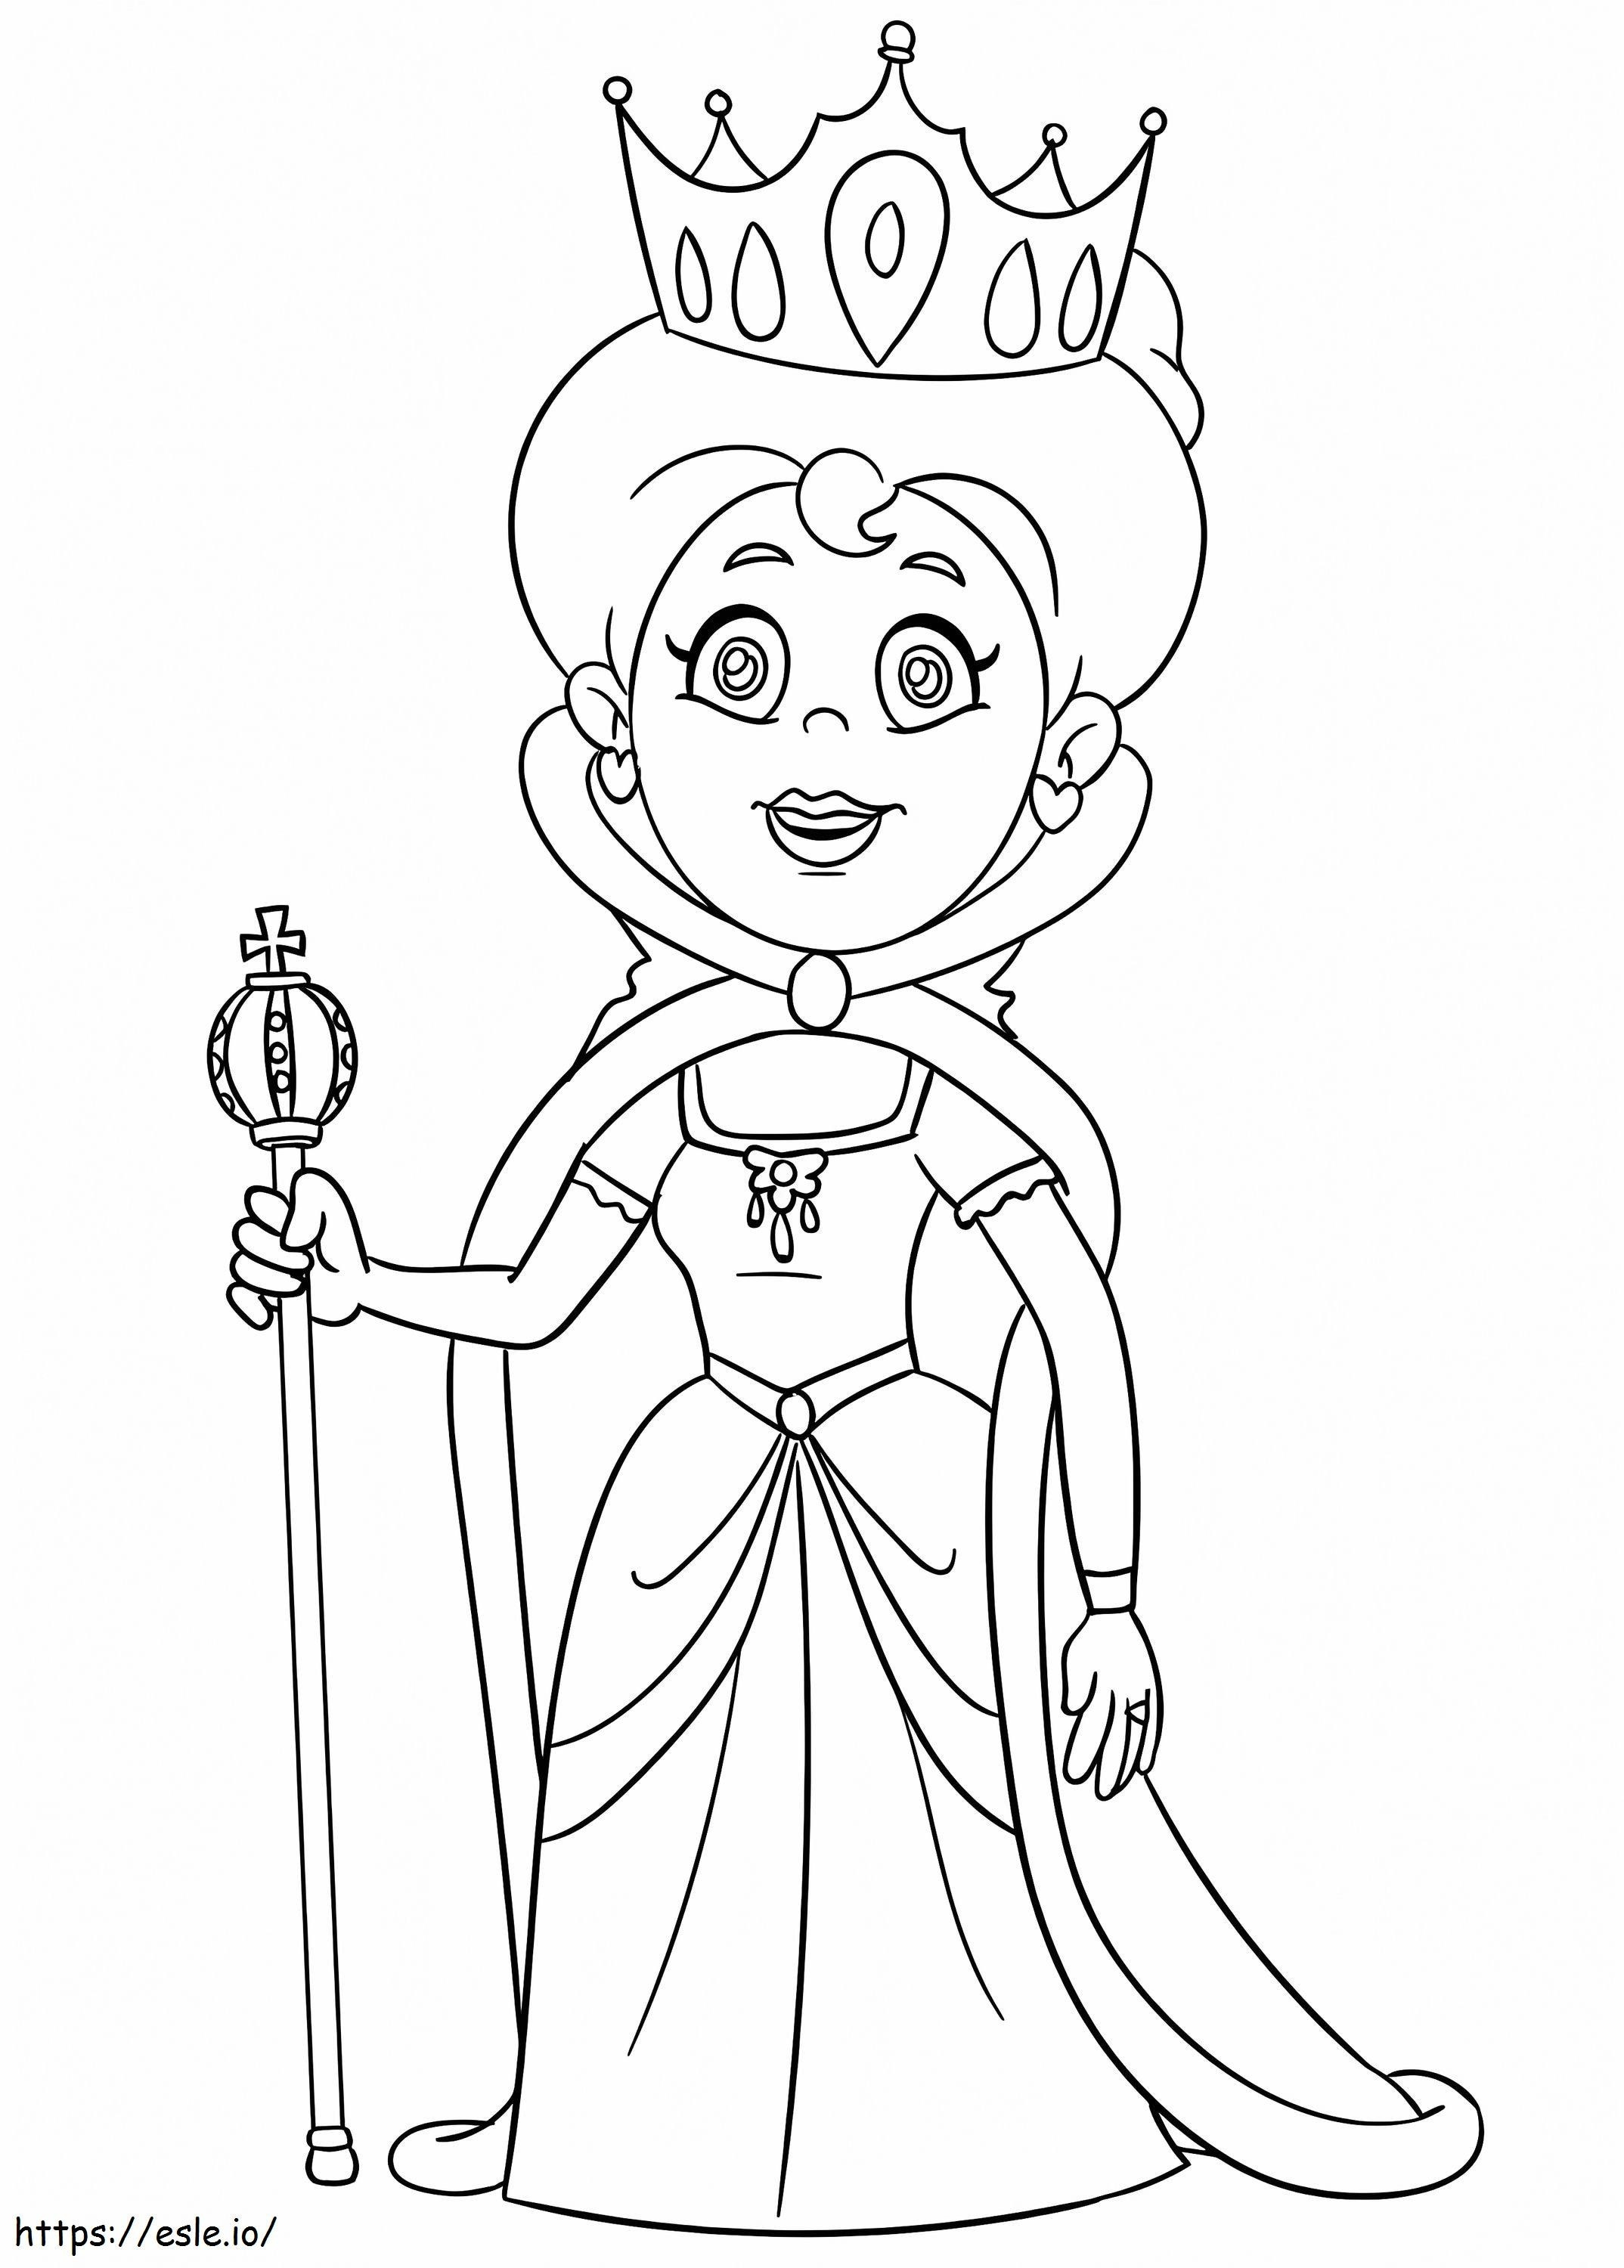 Queen Is Happy coloring page